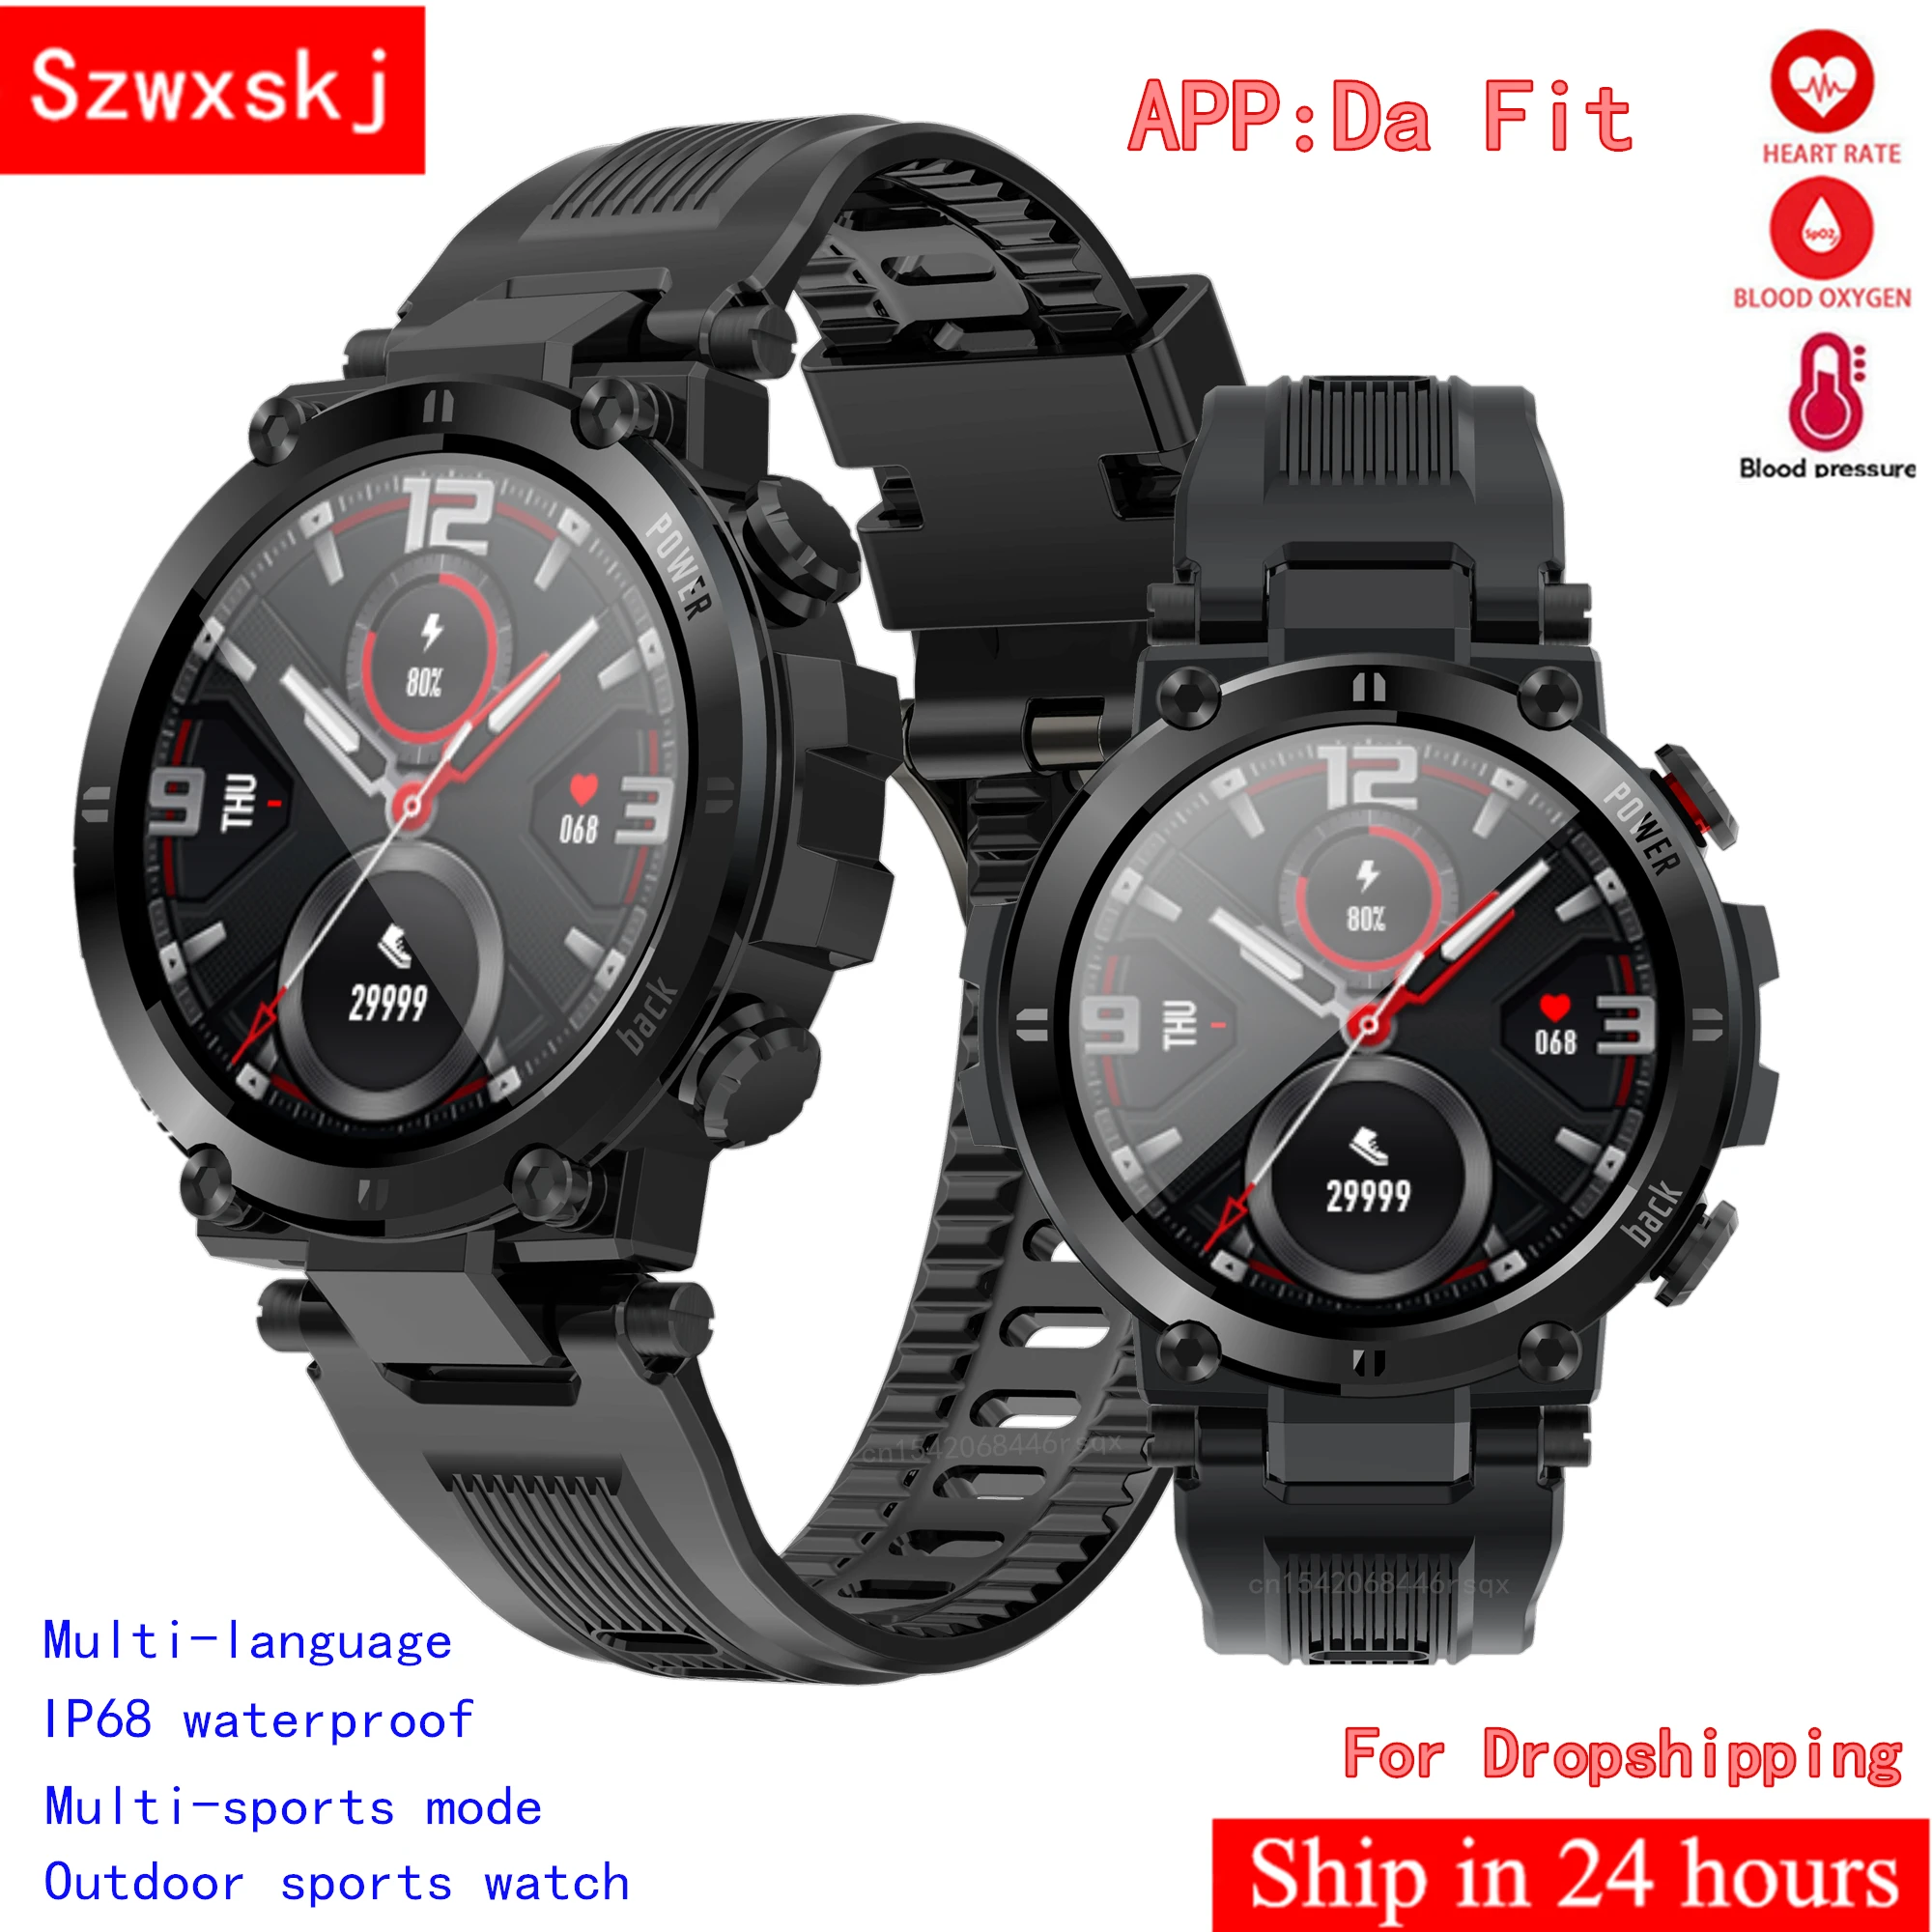 

2021 Men Full Touch Screen Smart Watch IP68 Waterproof with HR/BP Fitness Tracker D13 smartwatch for IOS Android PK K22 L15 L19